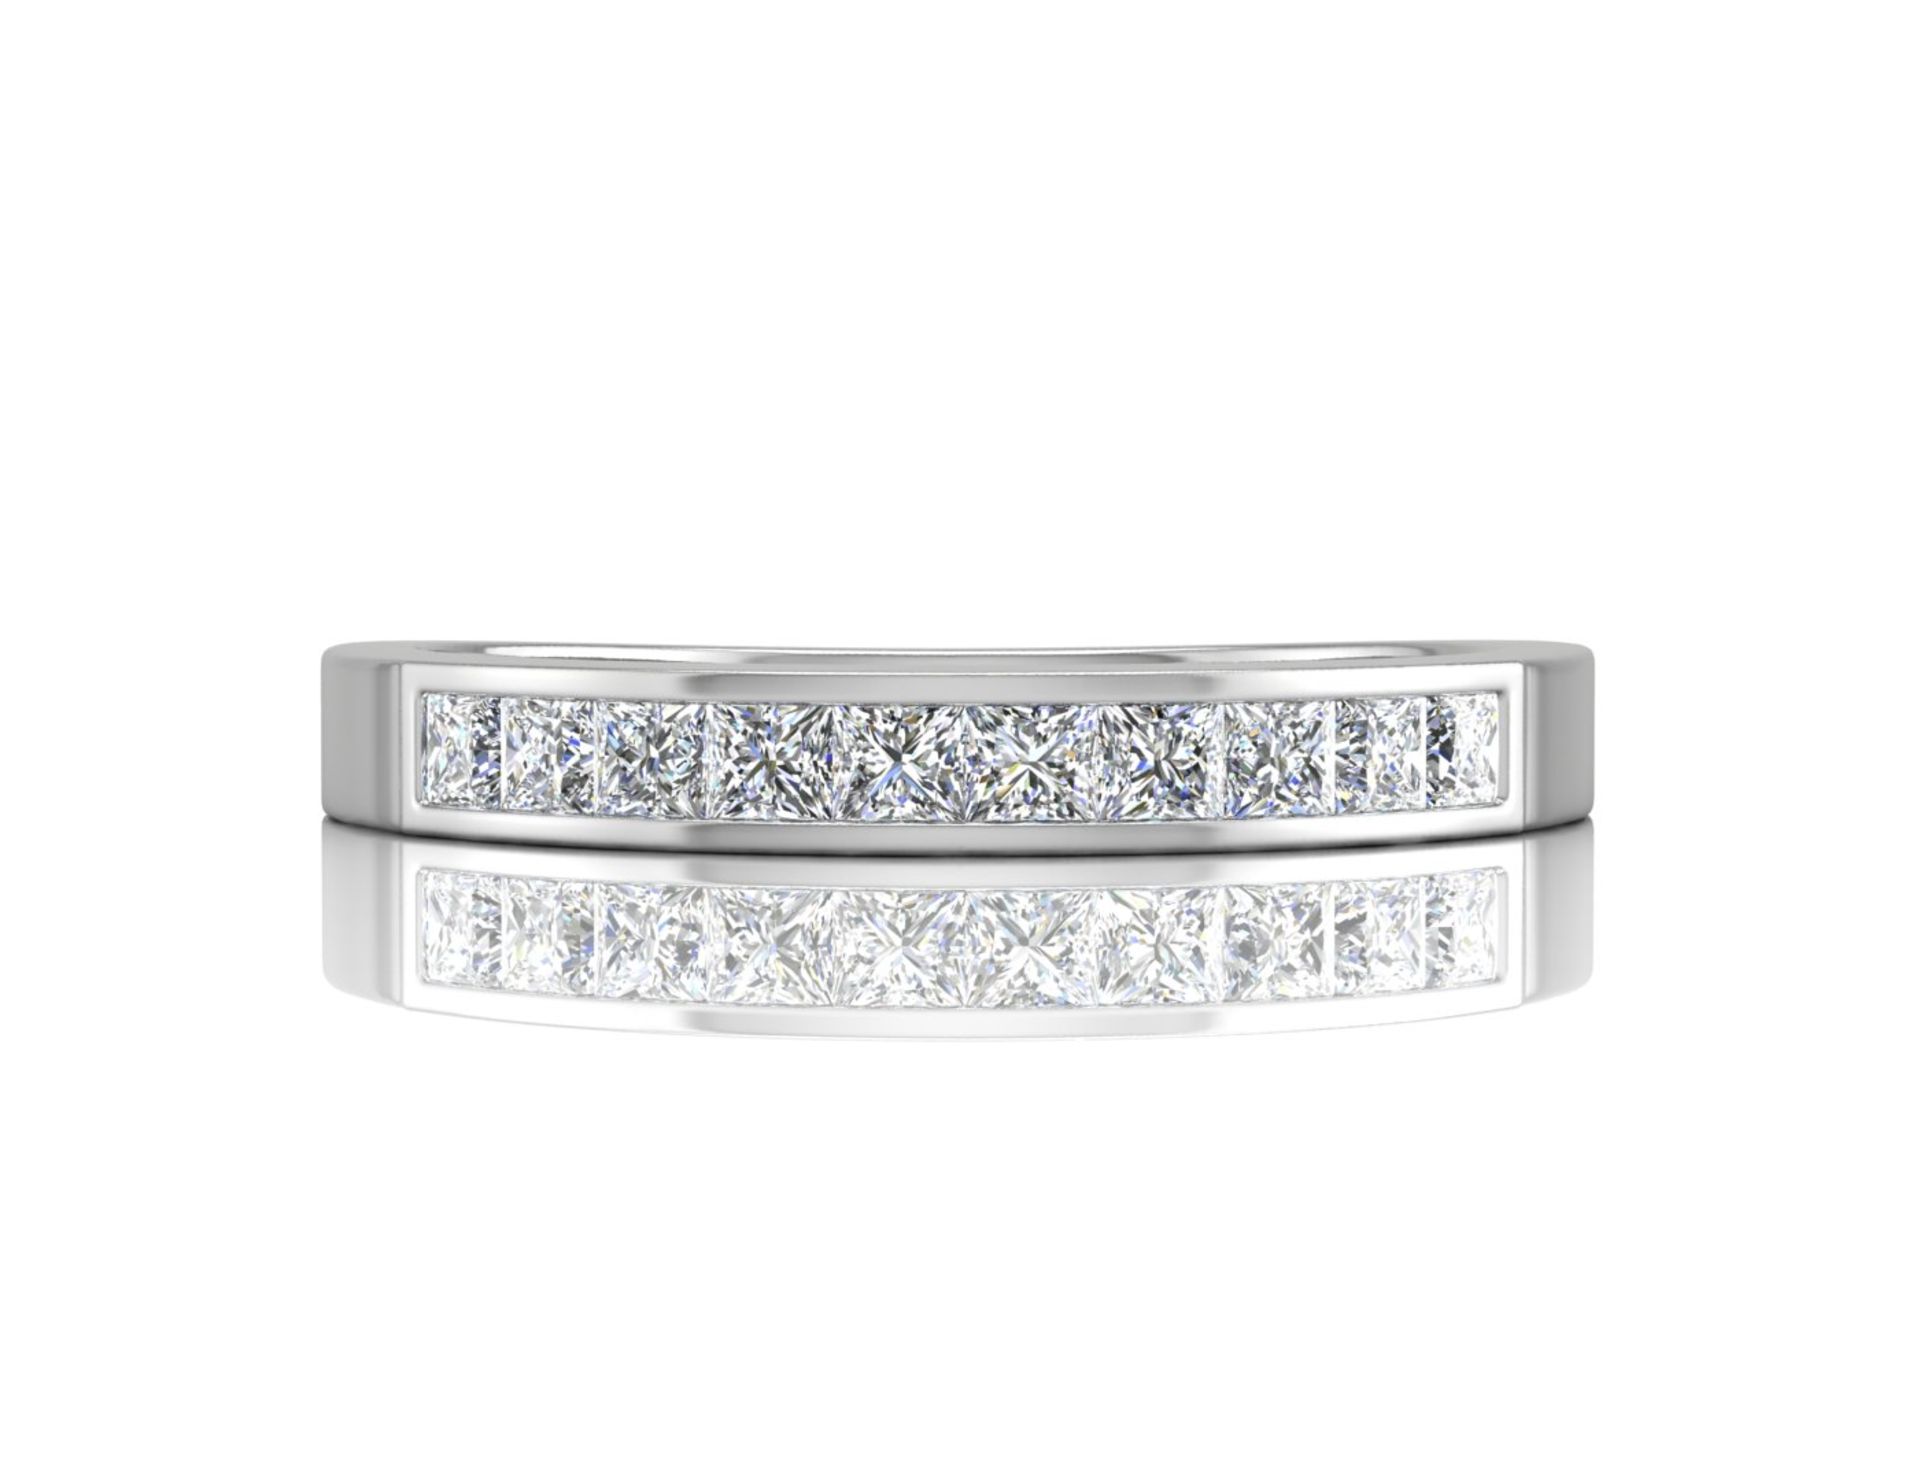 9ct White Gold Channel Set Half Eternity Diamond Ring 0.50 Carats - Valued by GIE £4,695.00 - Ten - Image 2 of 6